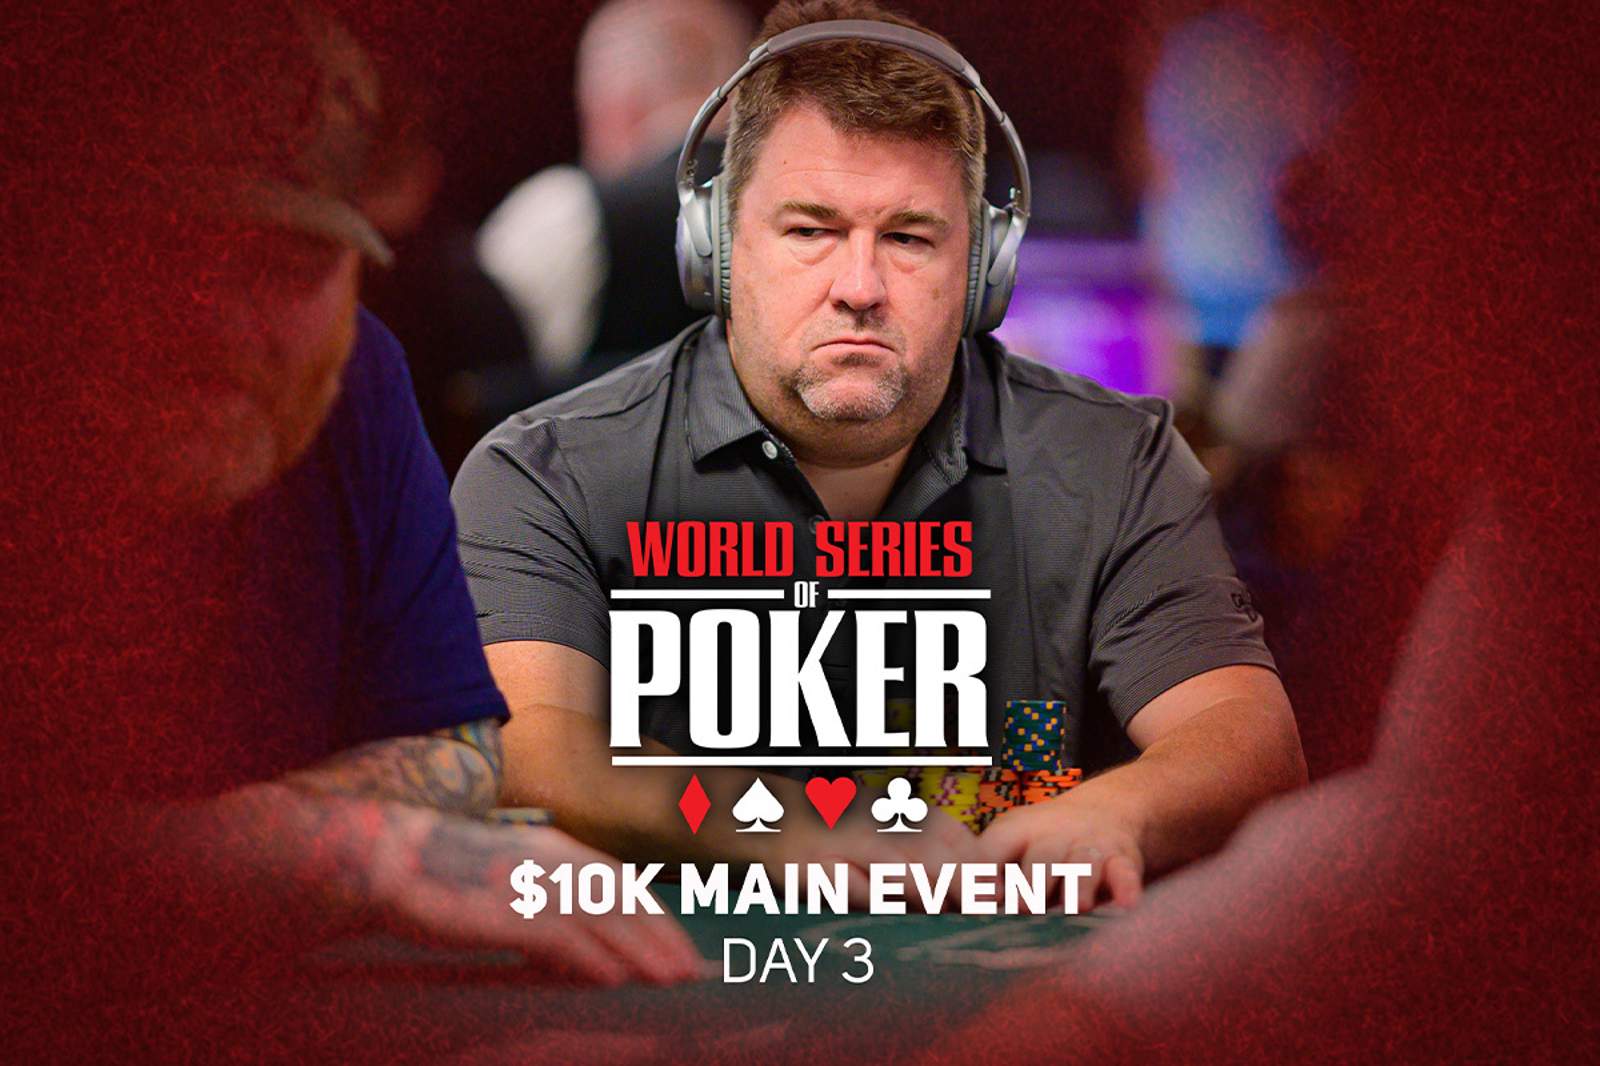 Watch Day 3 of the 2021 WSOP Main Event on PokerGO.com at 7:30 p.m. ET